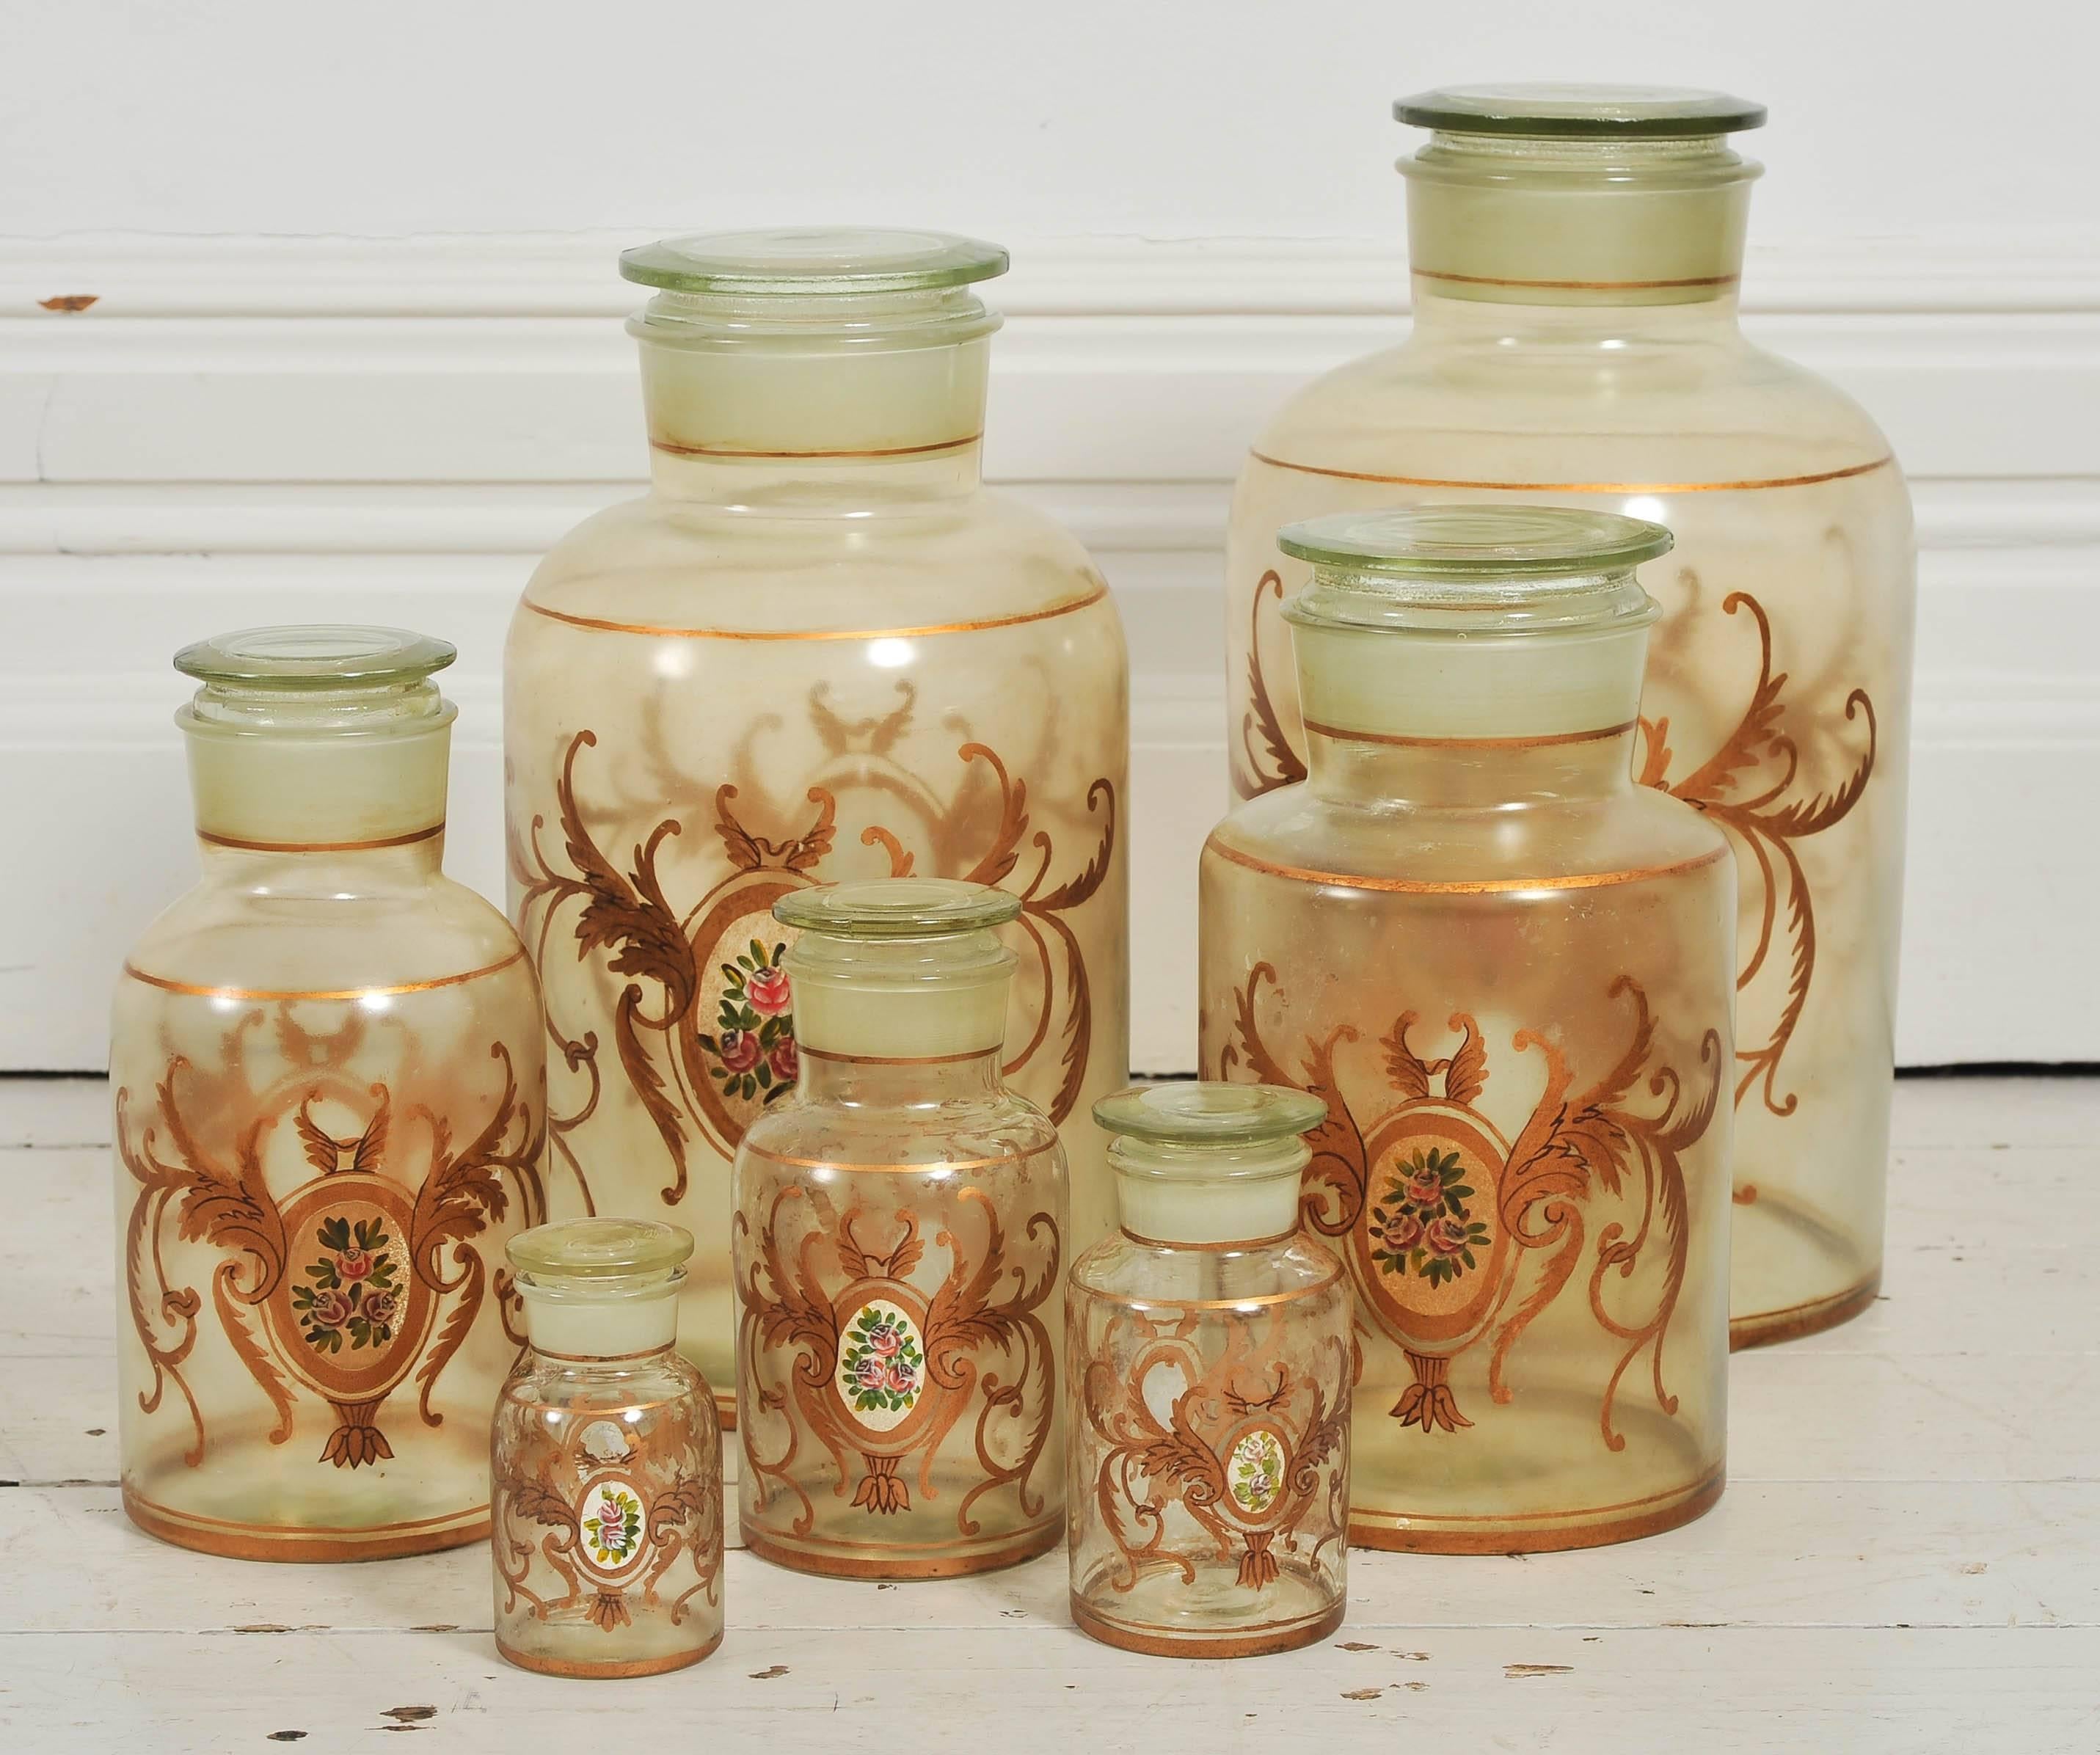 Here we have a set of seven antique apothecary jars hand decorated in gold and white. These would look wonderful in a bathroom or kitchen or on top of an armoire. 

Condition: Very good vintage condition. The small jar has a few small